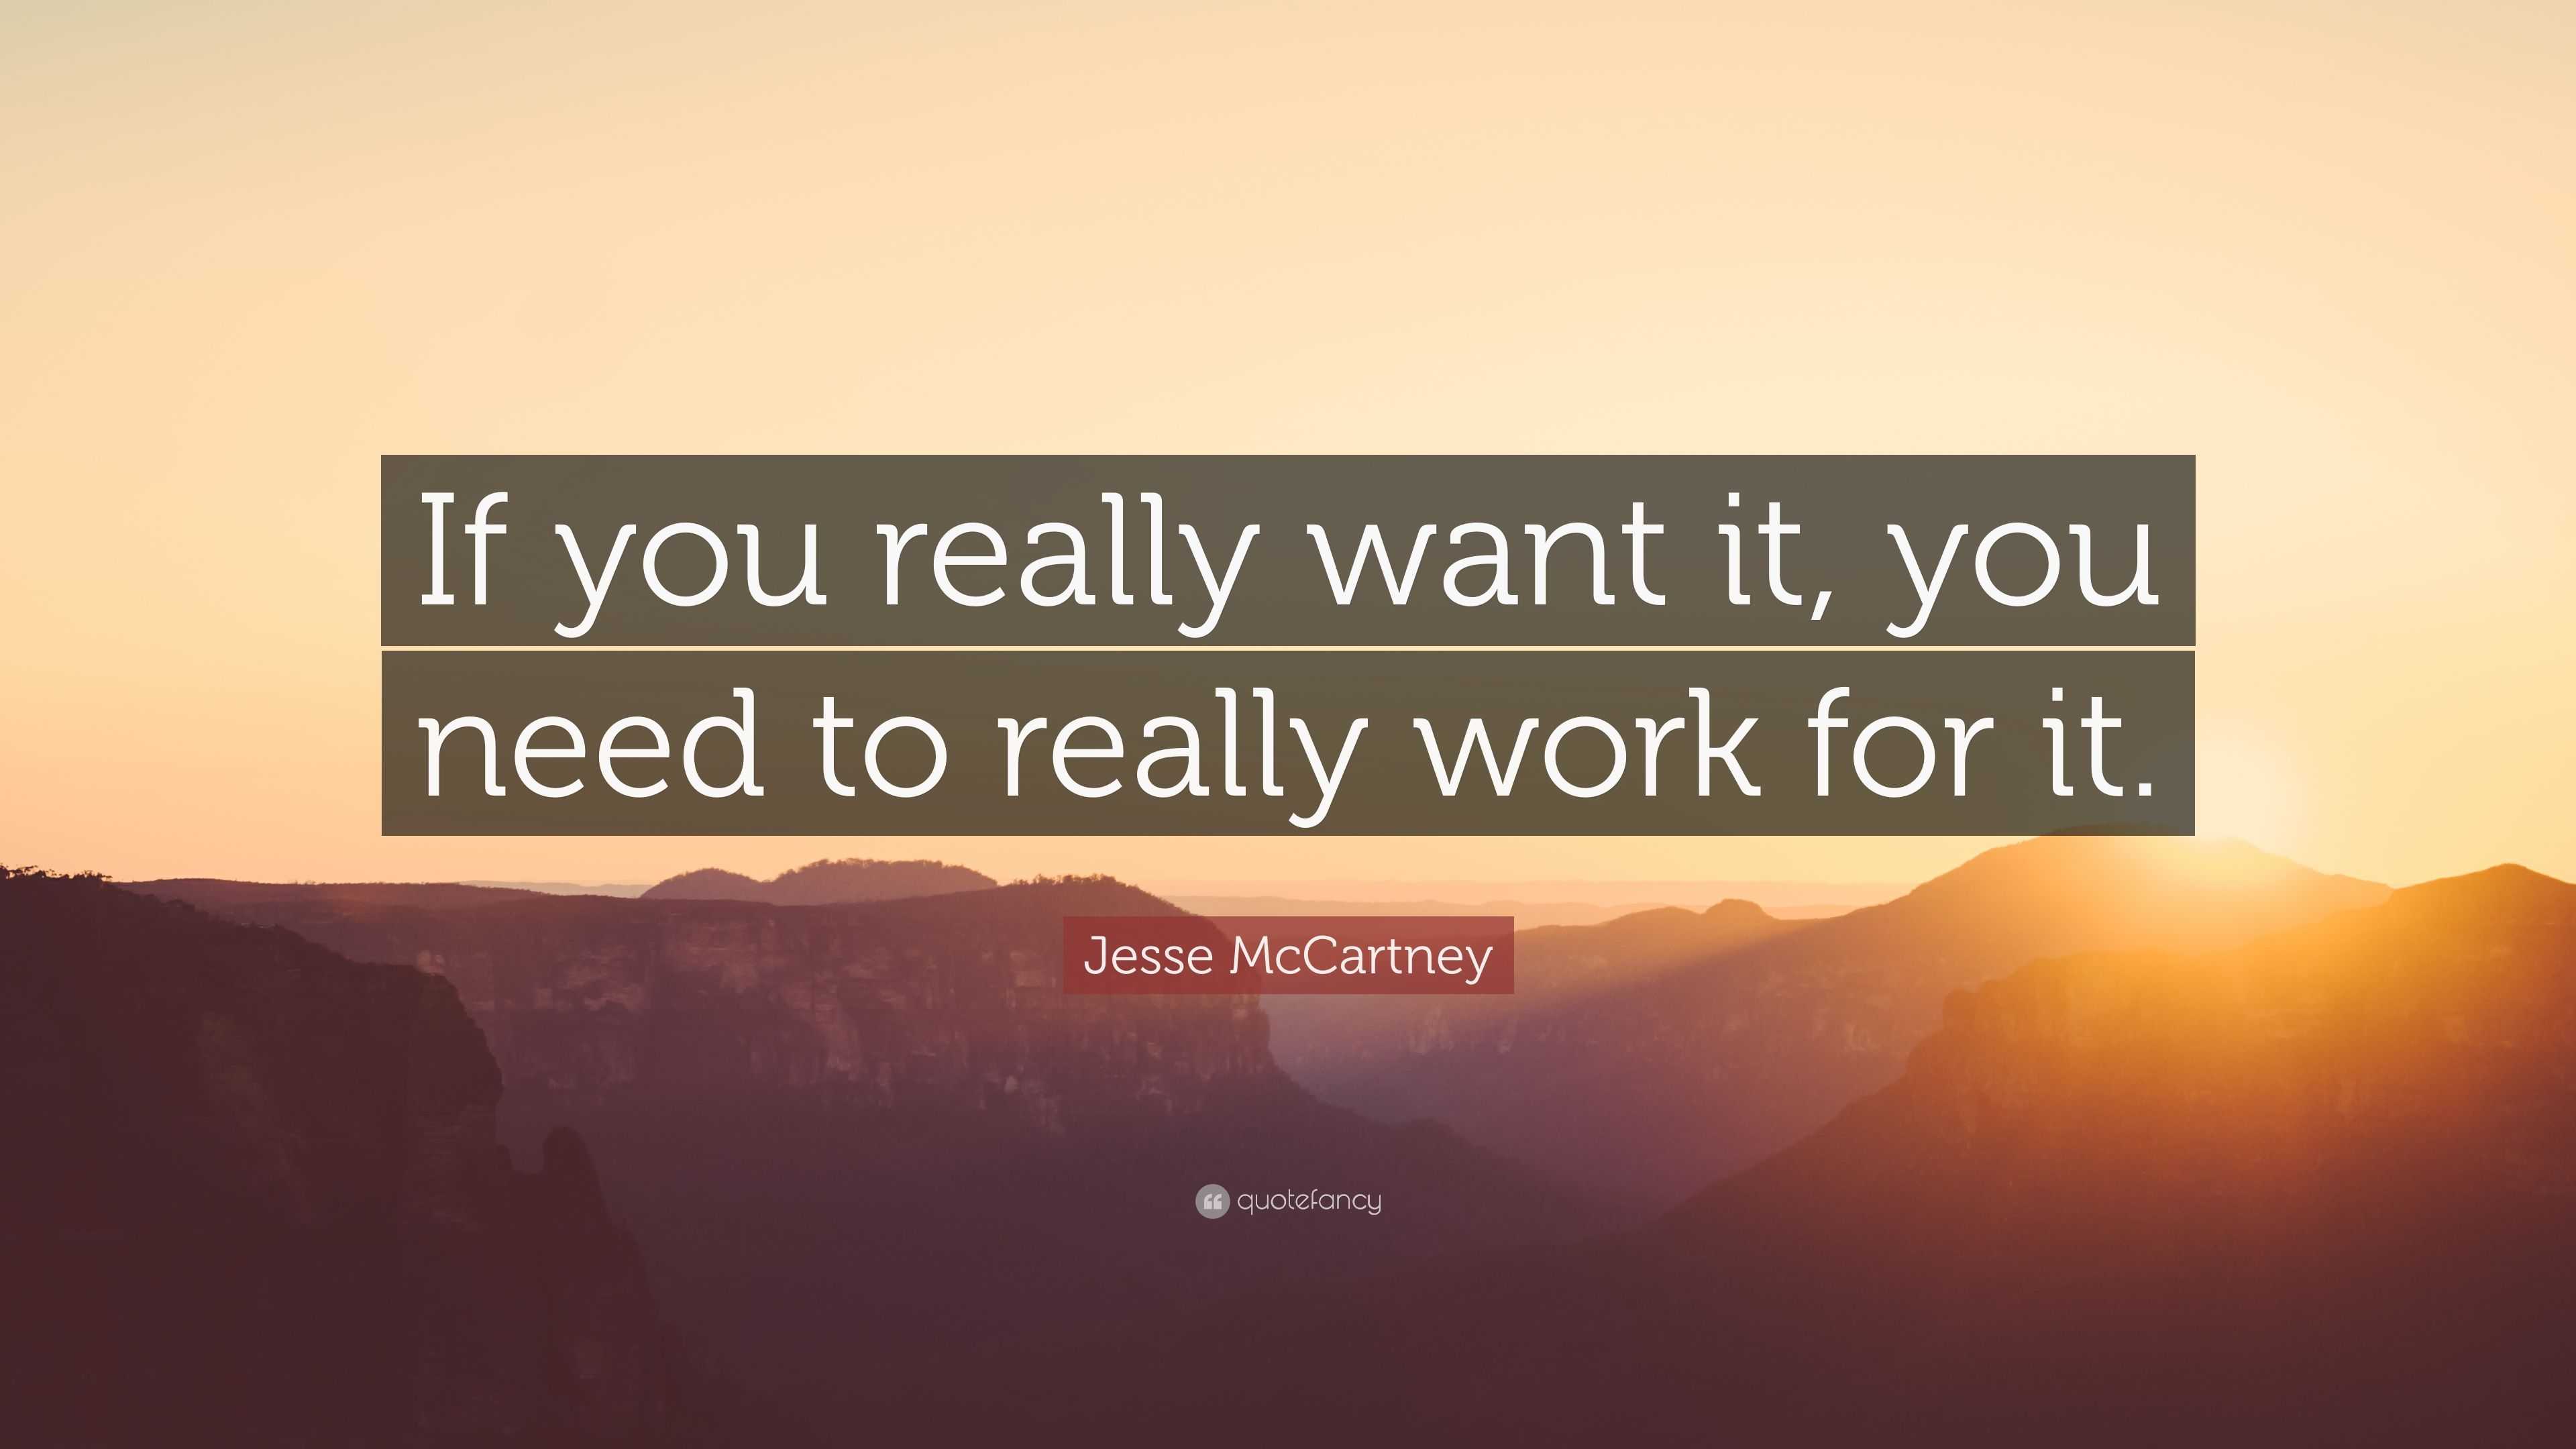 Jesse McCartney Quote: “If you really want it, you need to really work